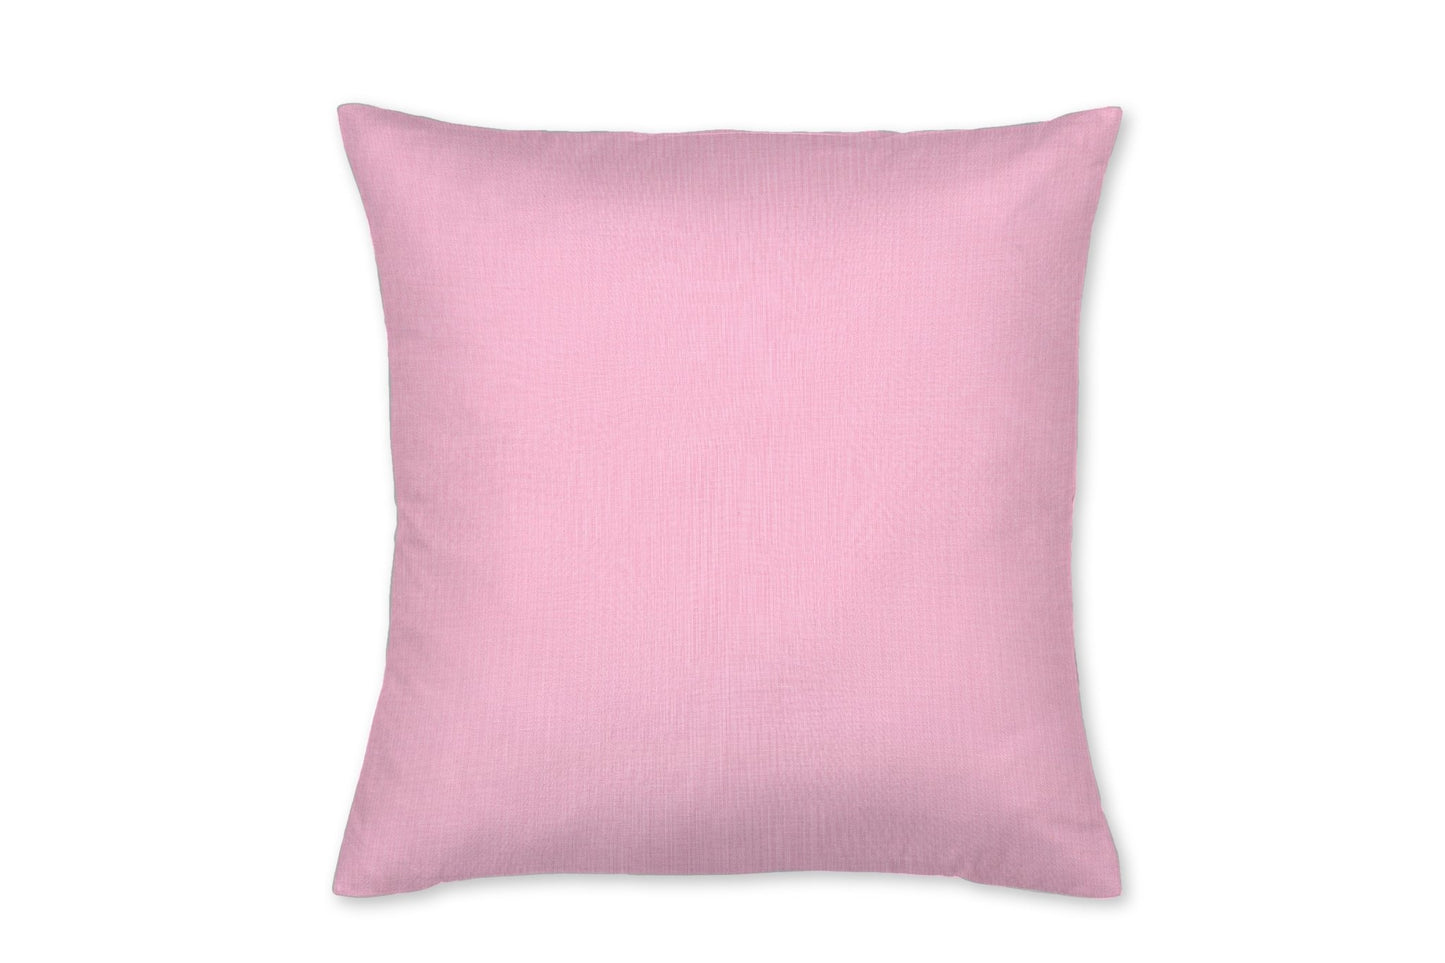 Pink and White Throw Pillow - New Arrivals Inc